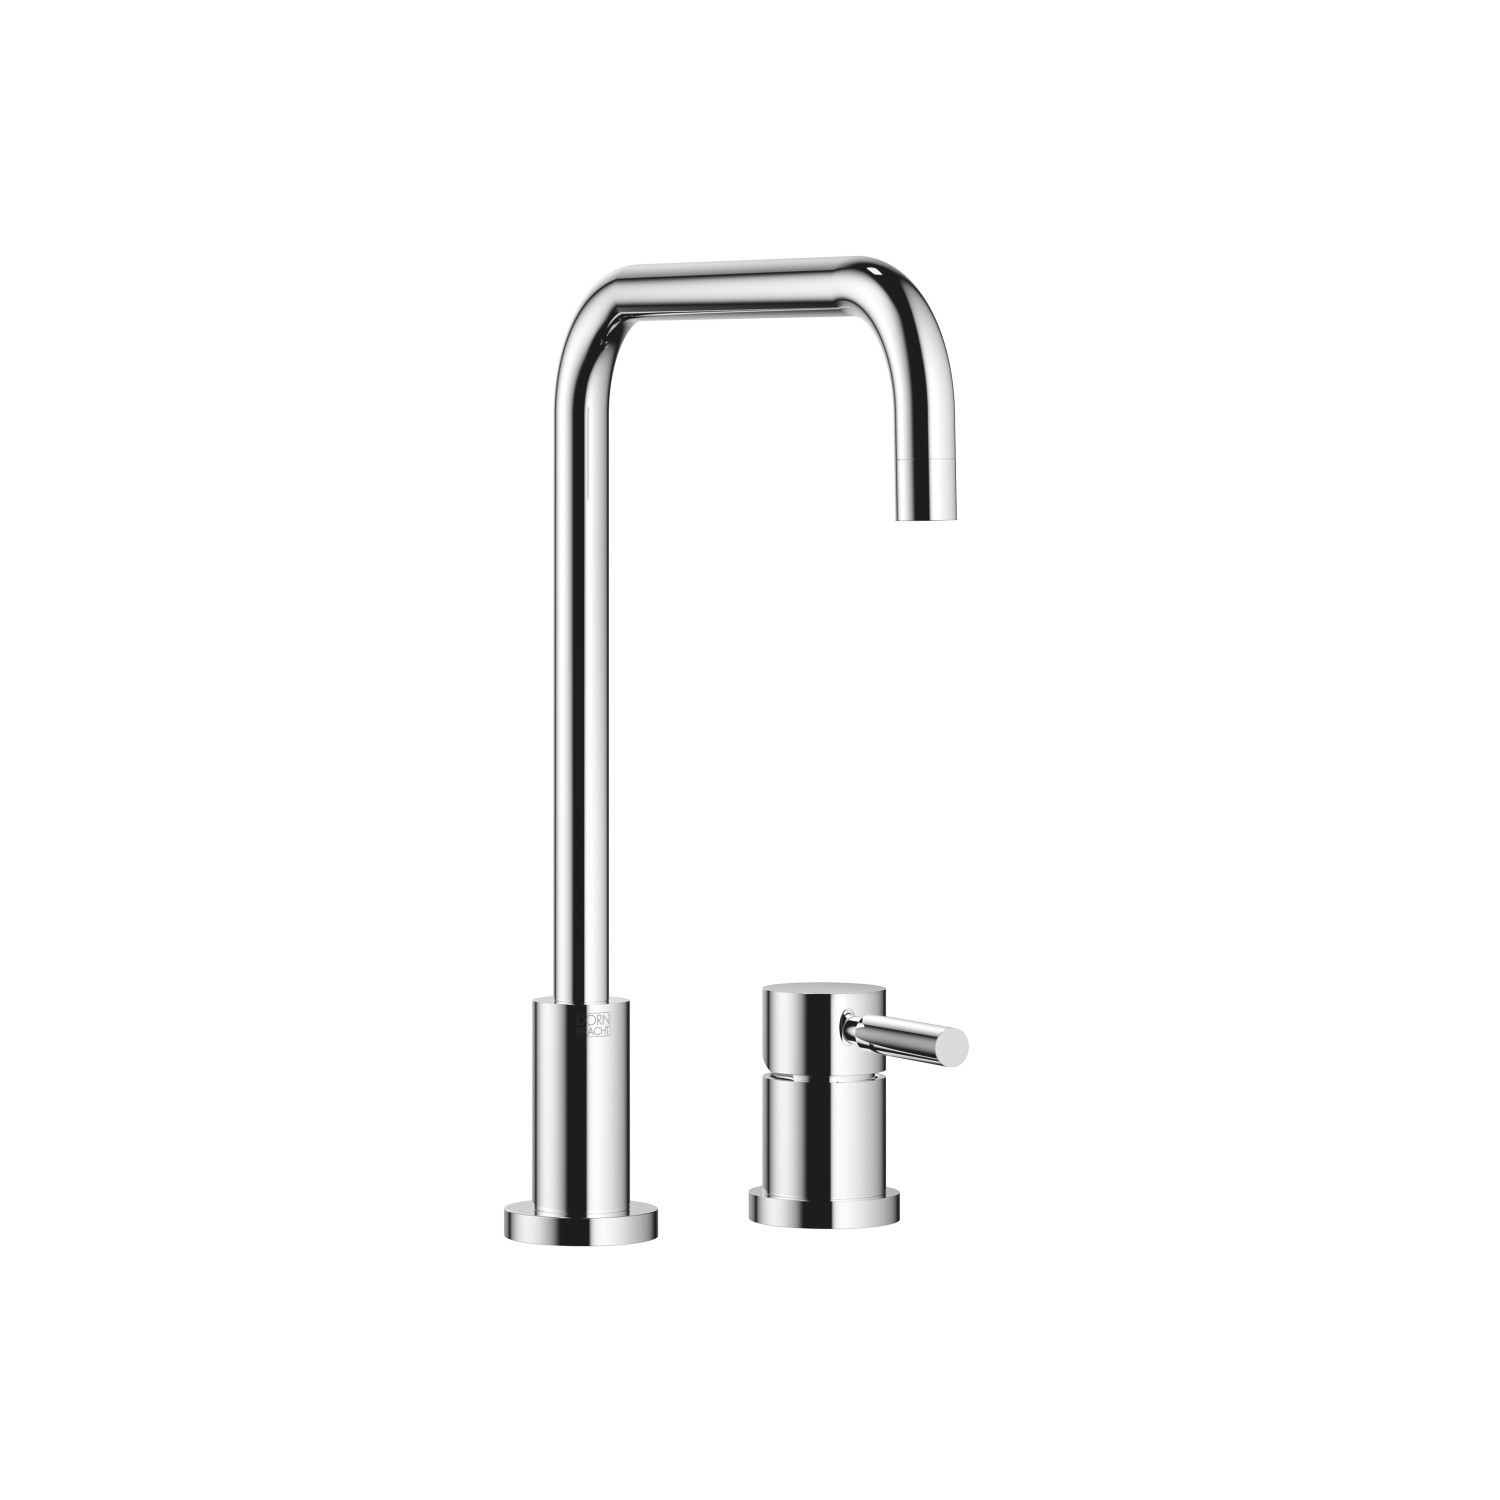 DORNBRACHT 32815625-0010 META.02 TWO HOLES DECK MOUNT KITCHEN FAUCET WITH INDIVIDUAL FLANGES AND LEVER HANDLES